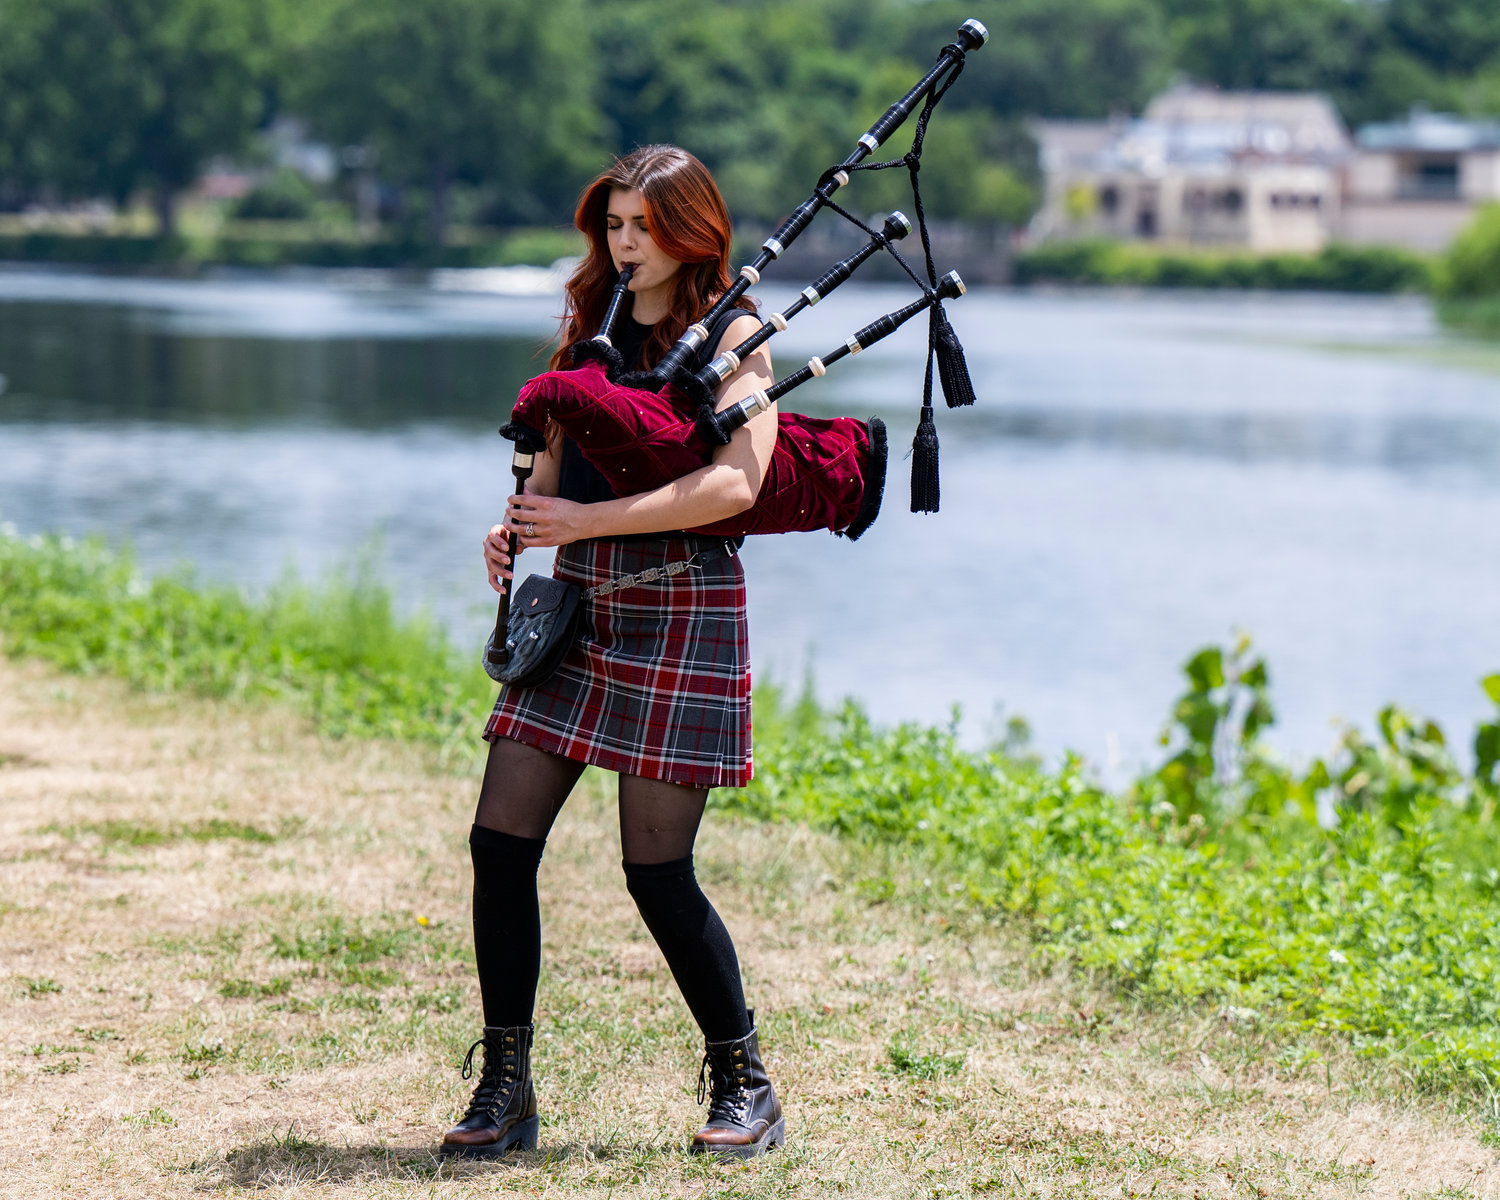 Ally Crowley-Duncan, aka Ally the Piper, plays the bagpipes in Collins Park in Scotia Wednesday, July 13, 2022.